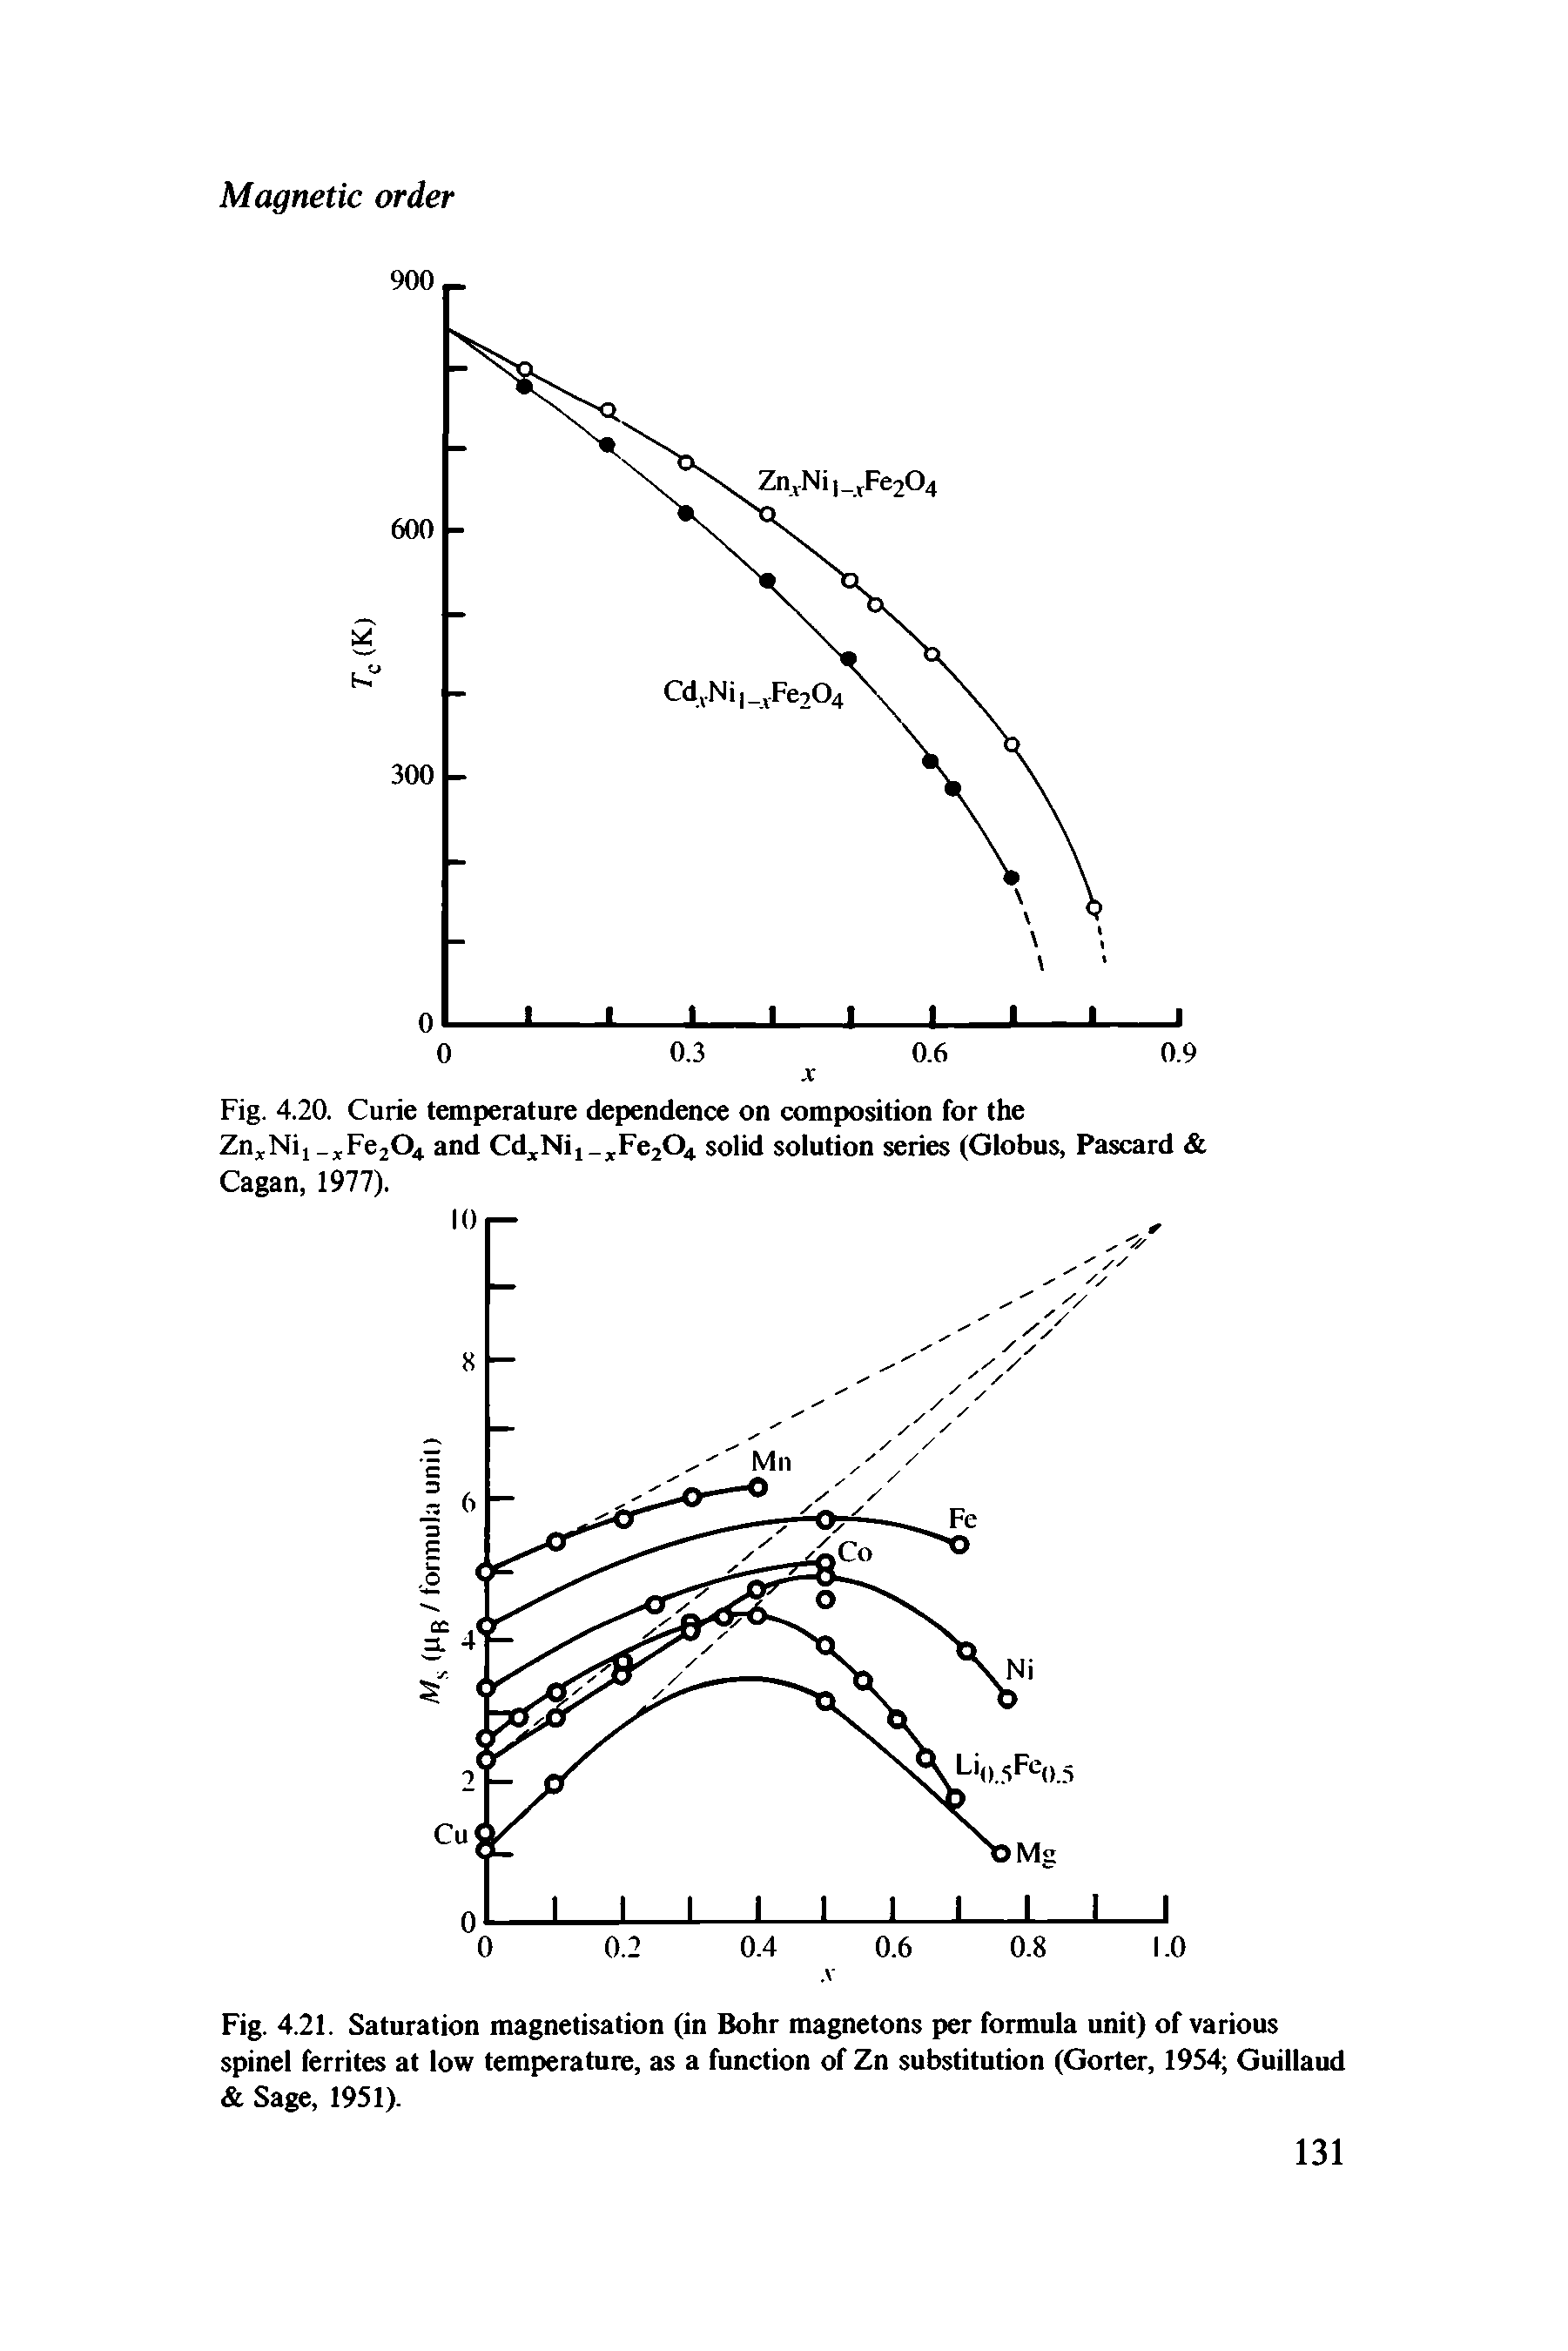 Fig. 4.21. Saturation magnetisation (in Bohr magnetons per formula unit) of various spinel ferrites at low temperature, as a function of Zn substitution (Gorier, 1954 Guillaud Sage, 1951).